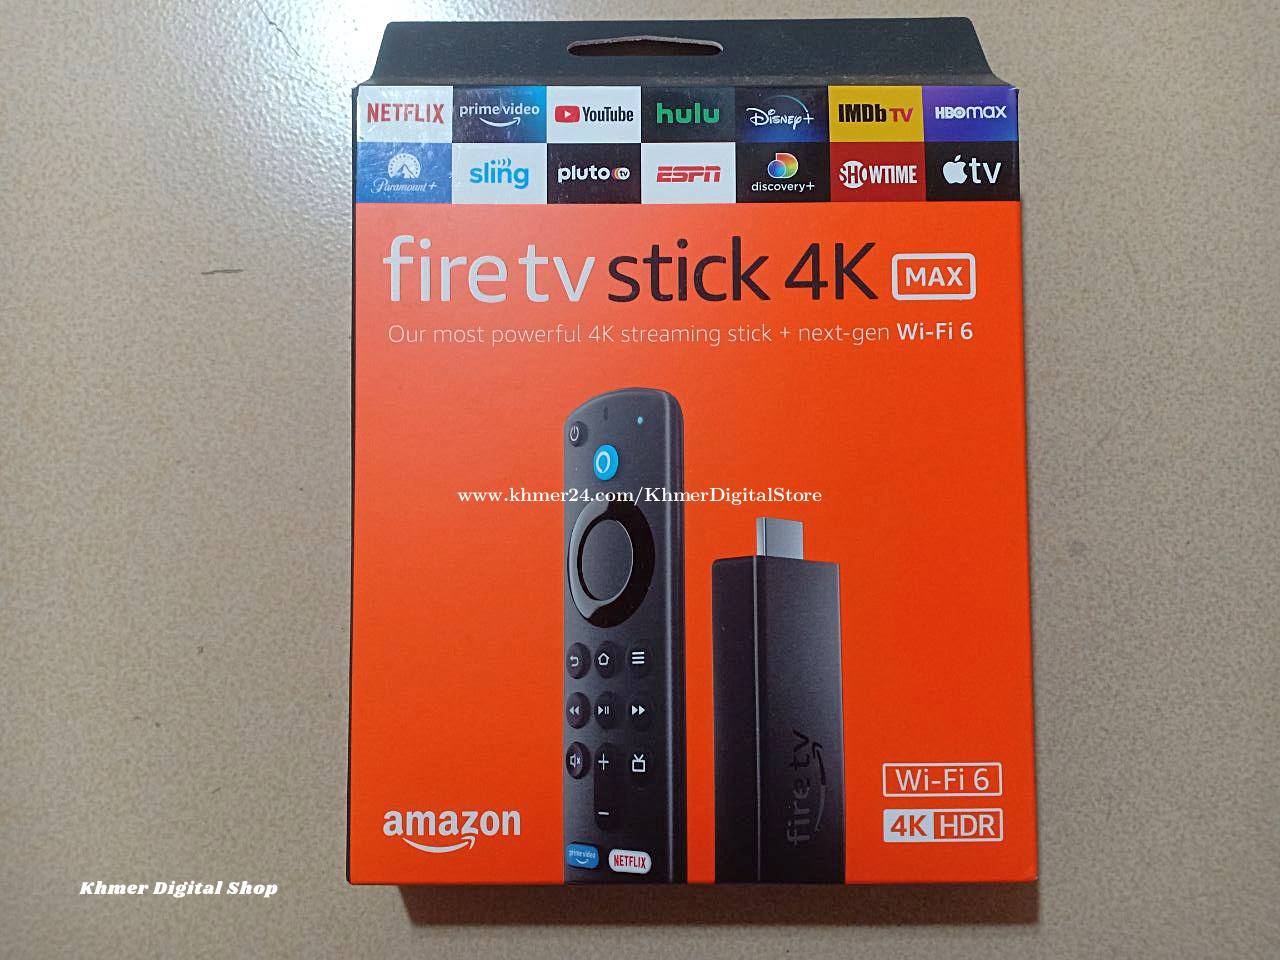 All-new  Fire TV Stick 4K streaming device, more than 700,000 movies  and TV episodes, supports Wi-Fi 6, watch free & live TV